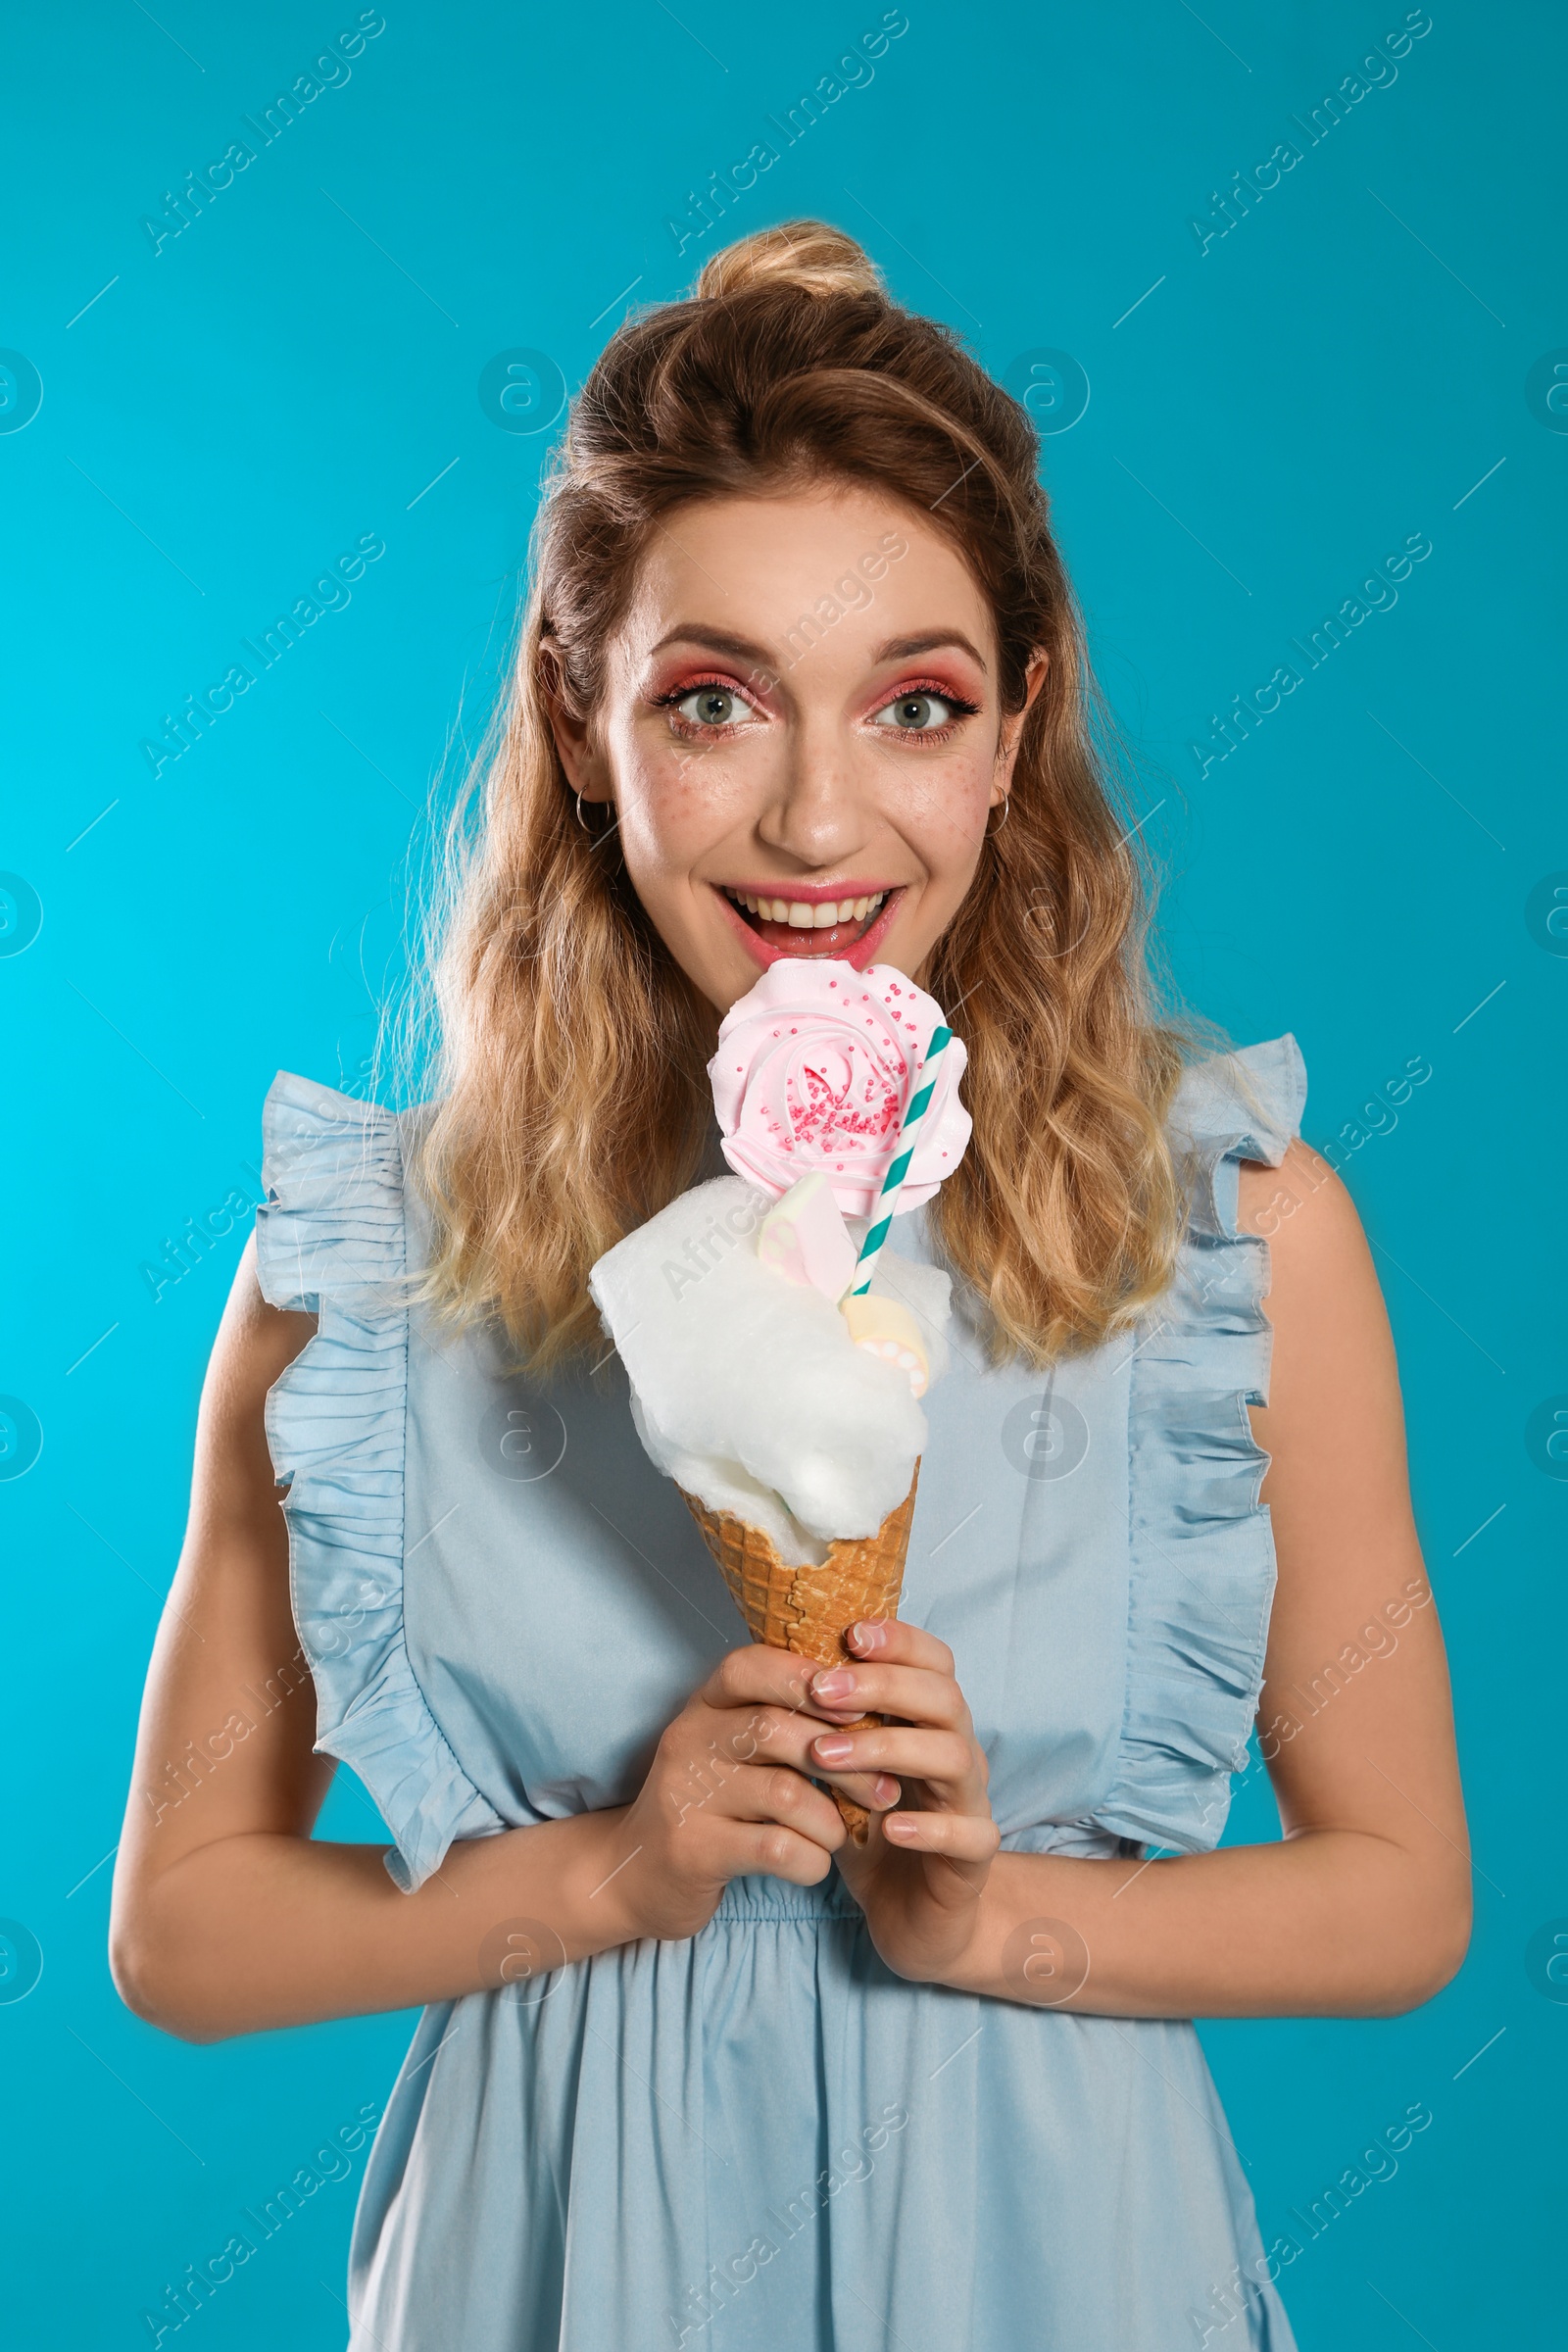 Photo of Portrait of young woman holding cotton candy dessert on blue background